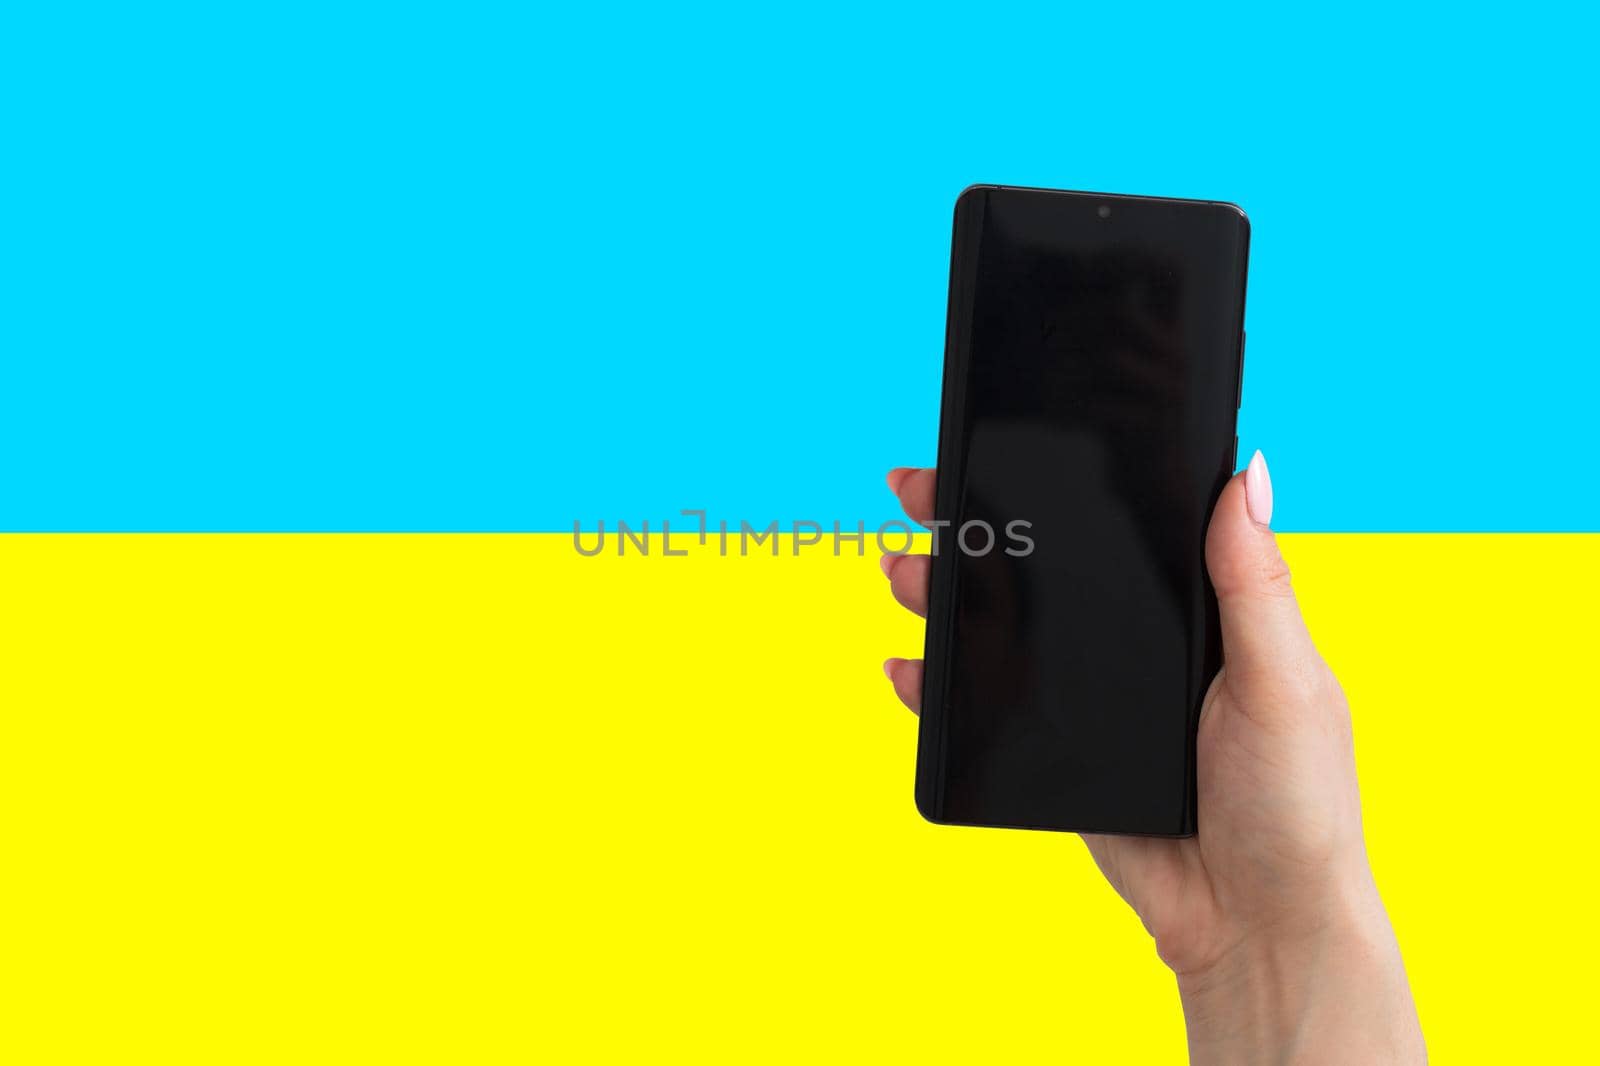 Illustration of a hand holding a smartphone with the flag of Ukraine.